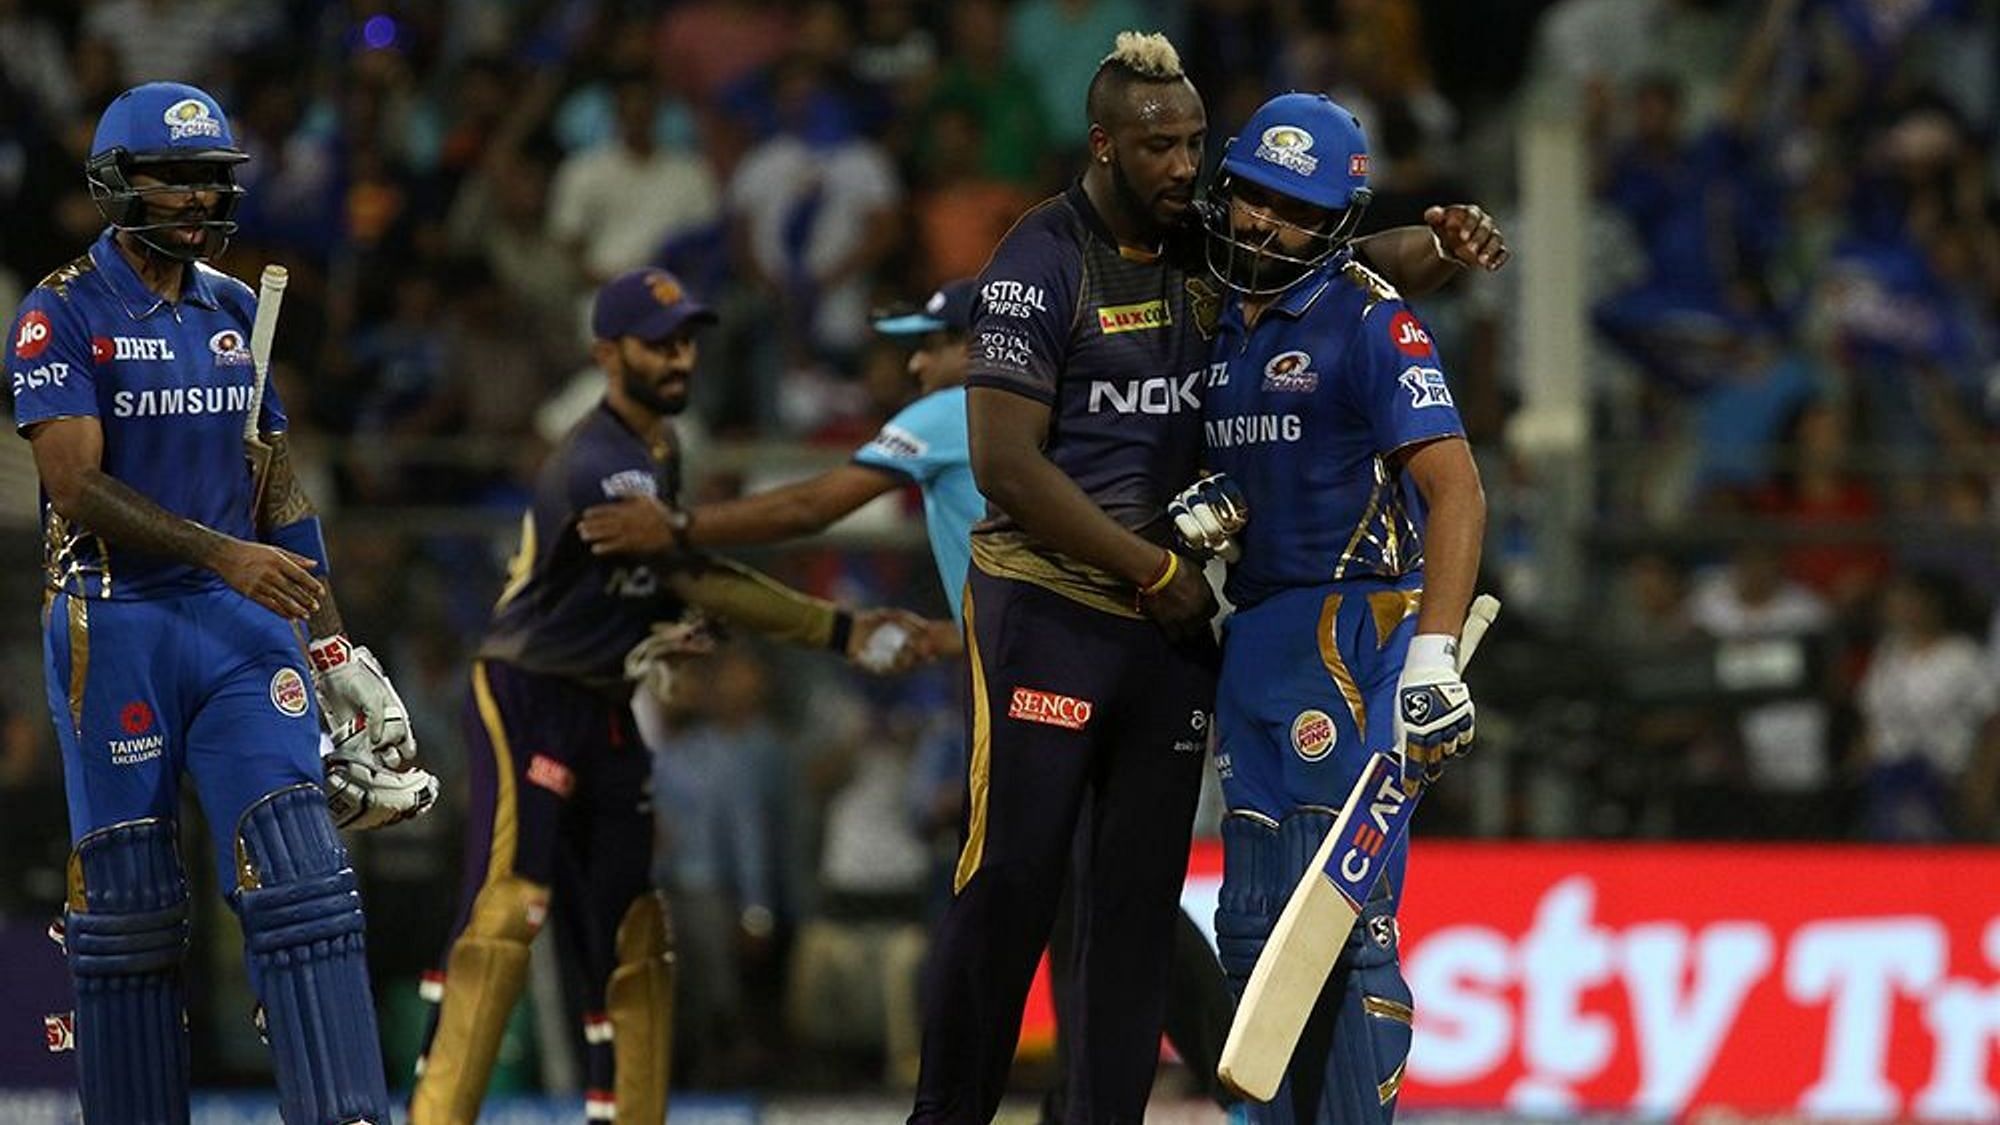 Kolkata Knight Riders will look to open their campaign on high, Mumbai Indians seeks first victory